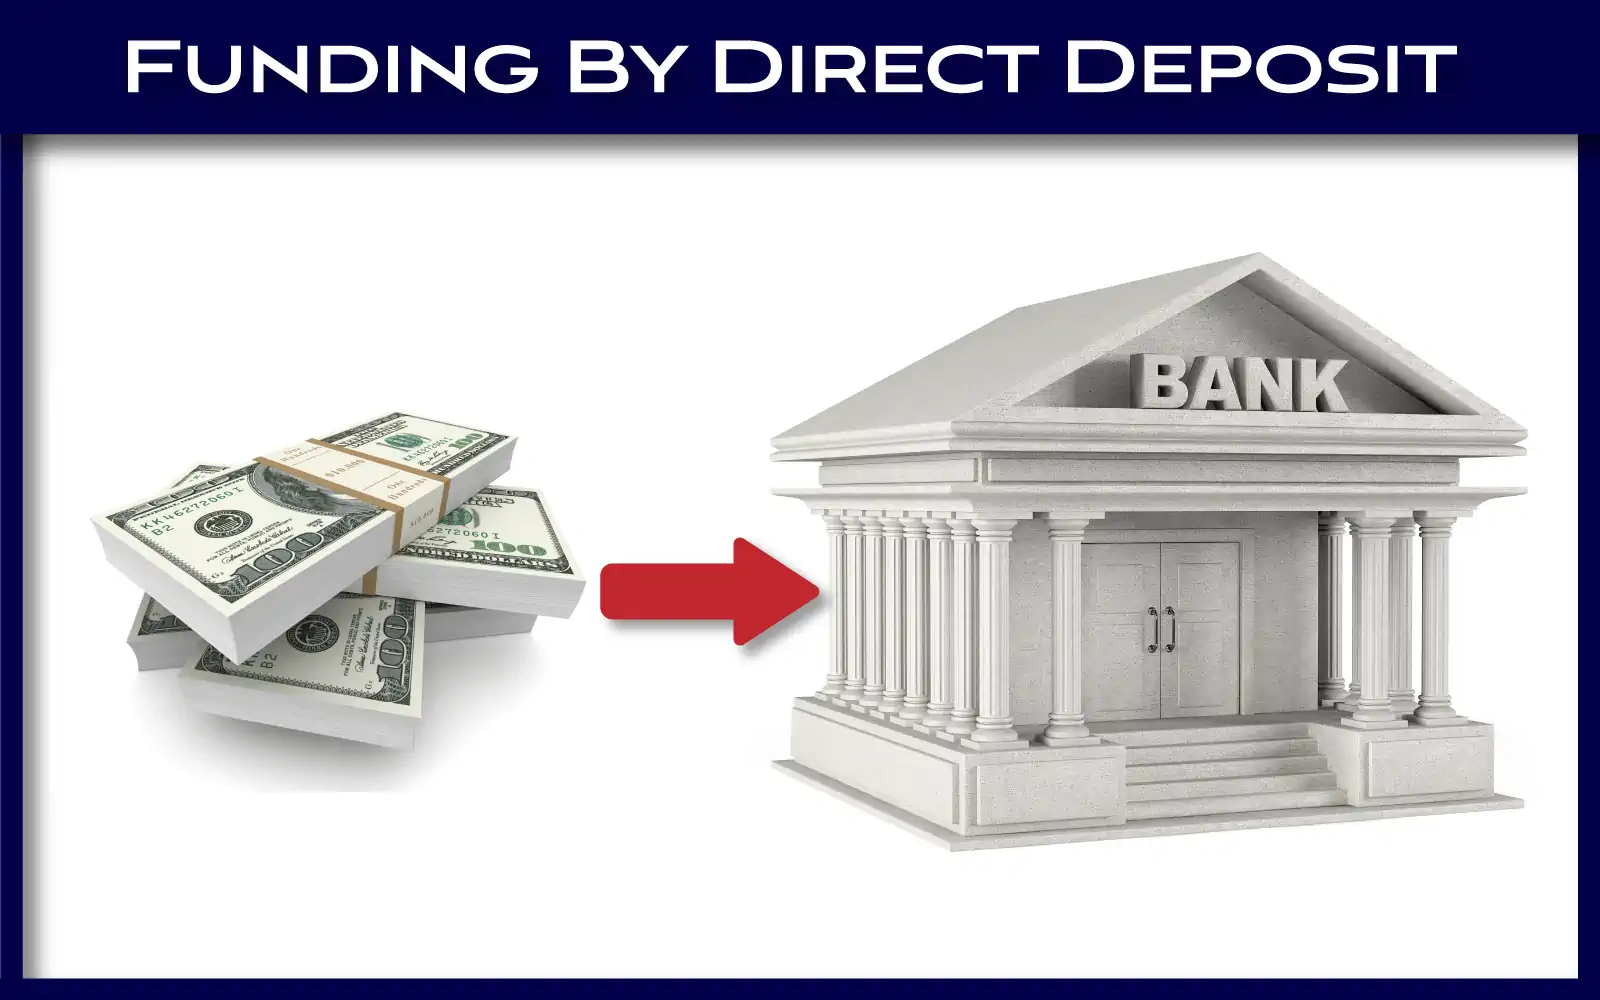 Cash direct deposited to bank